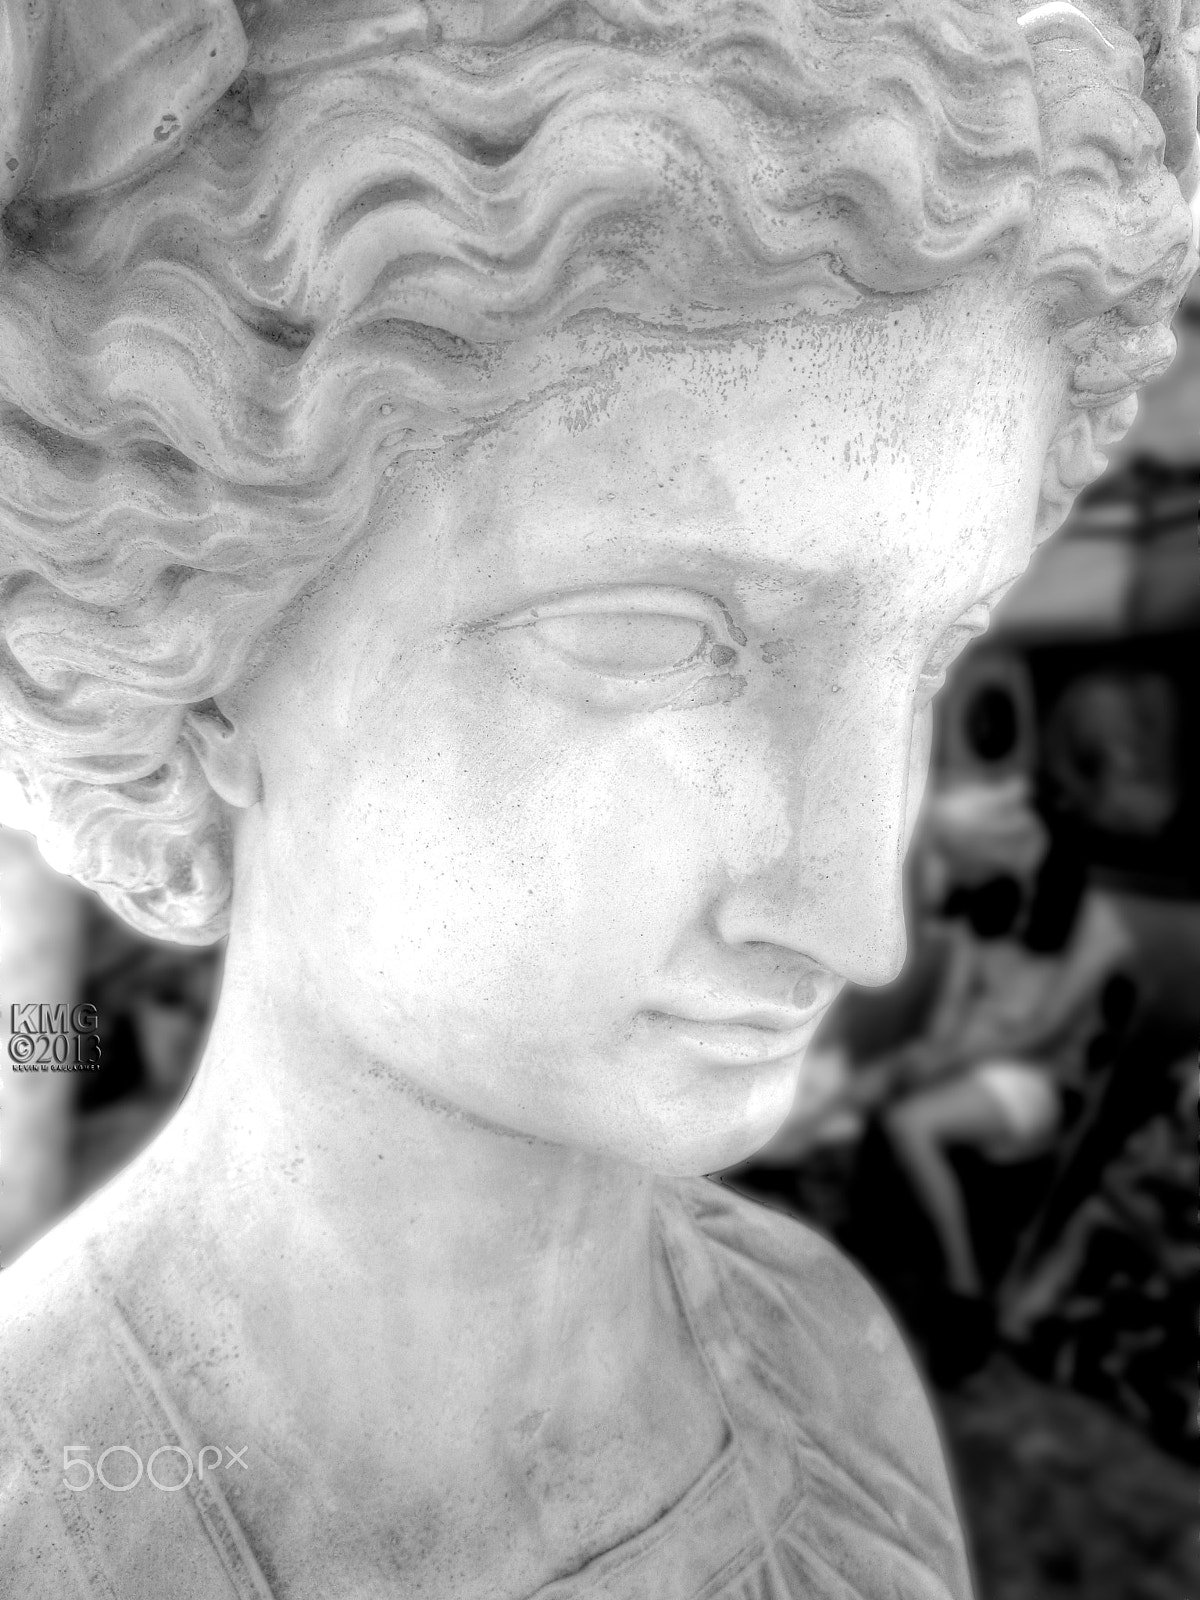 Canon PowerShot ELPH 330 HS (IXUS 255 HS / IXY 610F) sample photo. Female bust in black and white o photography